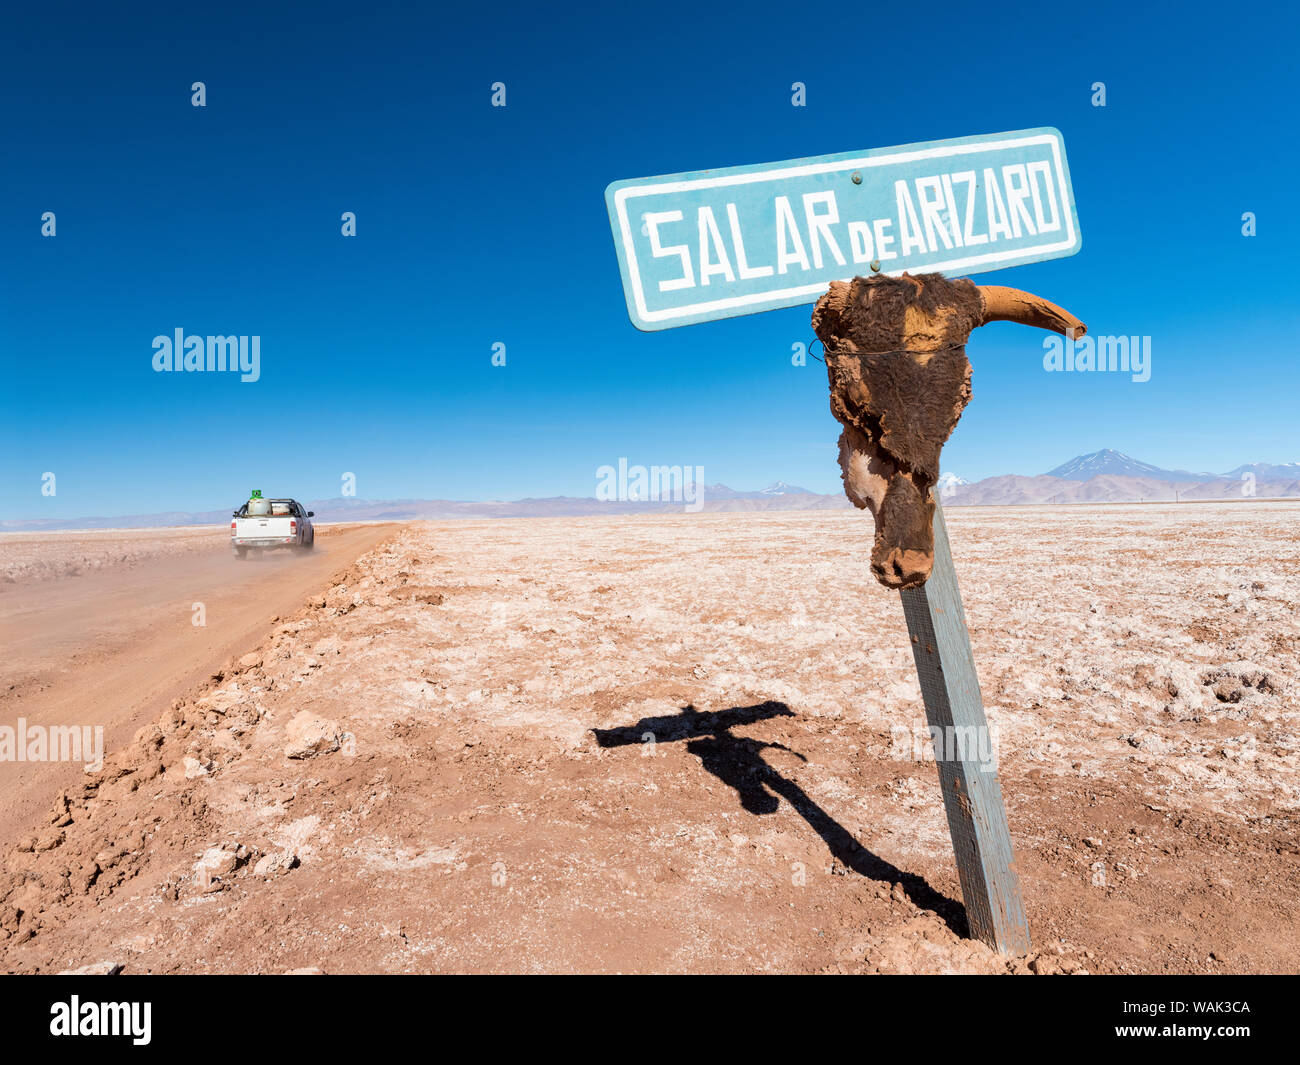 Salar de Arizaro, one of the largest salt flats in the world. The Altiplano, near the village of Tolar Grande, close to the border of Chile. South America, Argentina (Editorial Use Only) Stock Photo